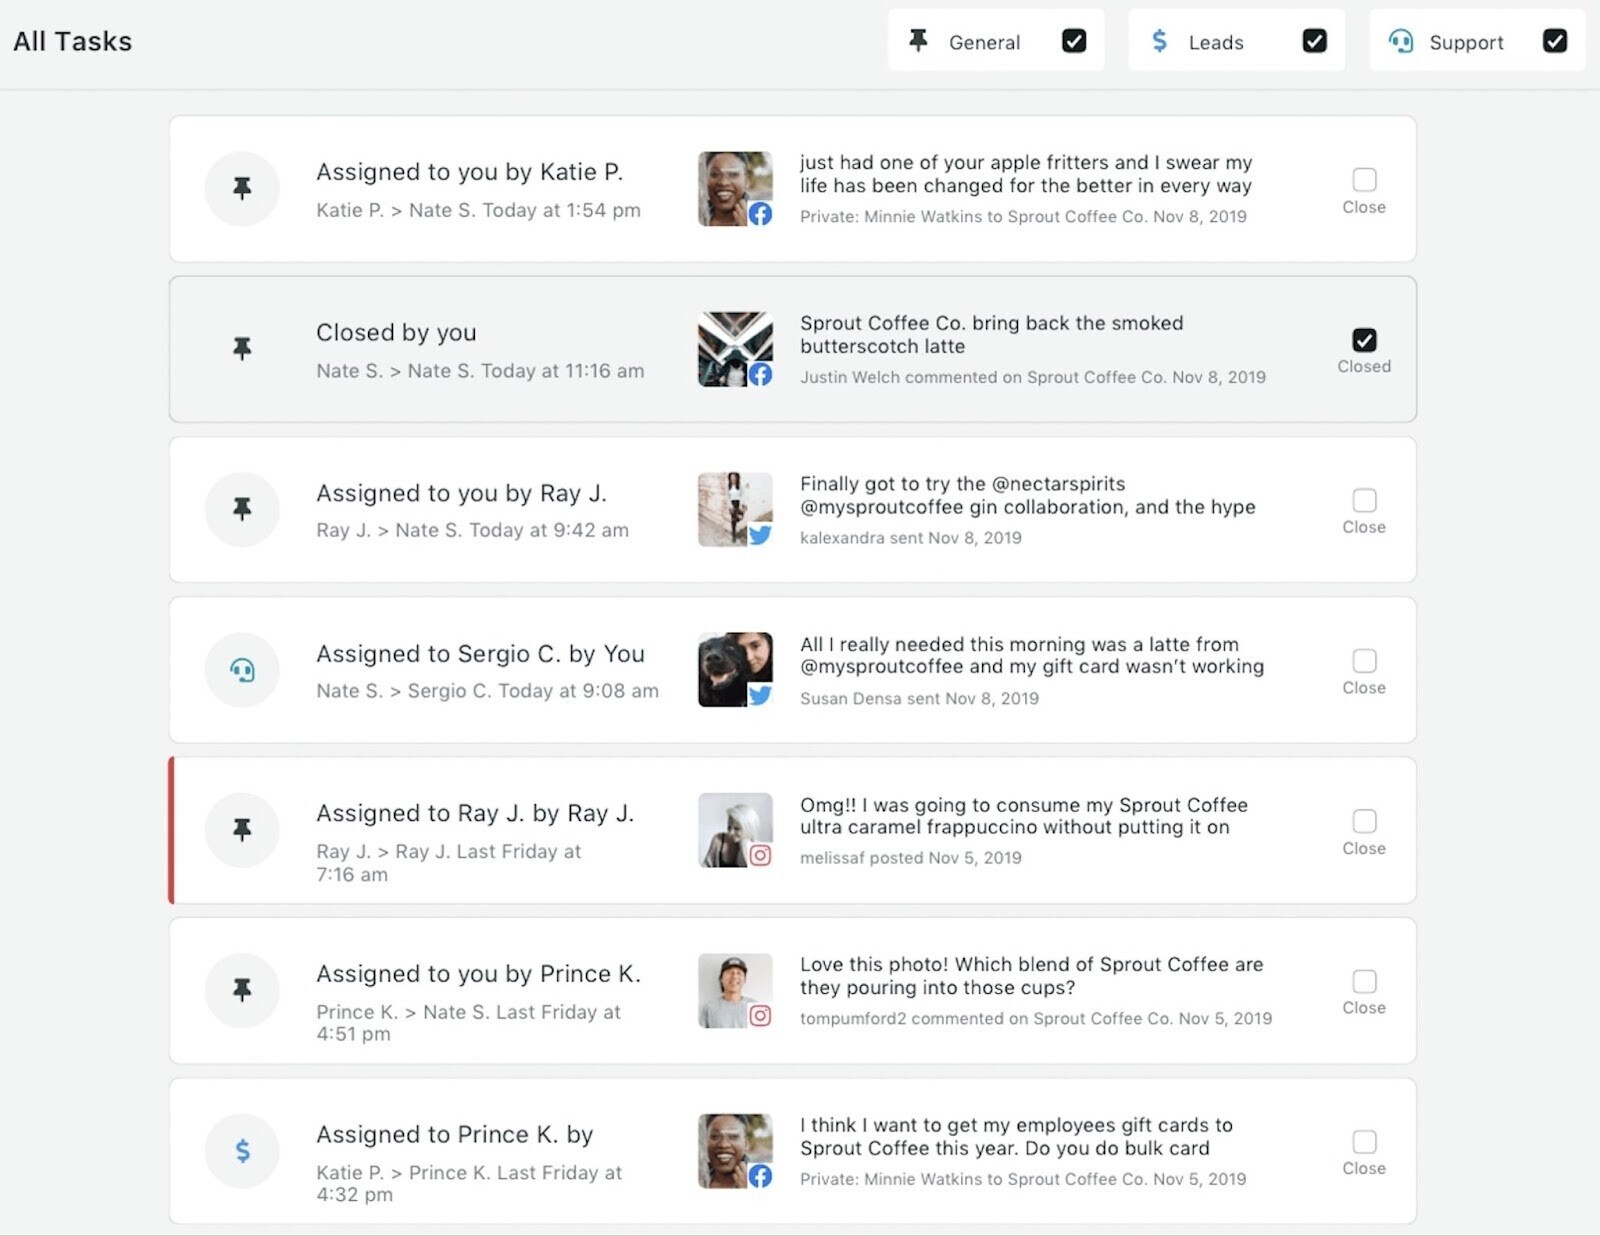 "All Tasks" page showing team activity in Sprout Social